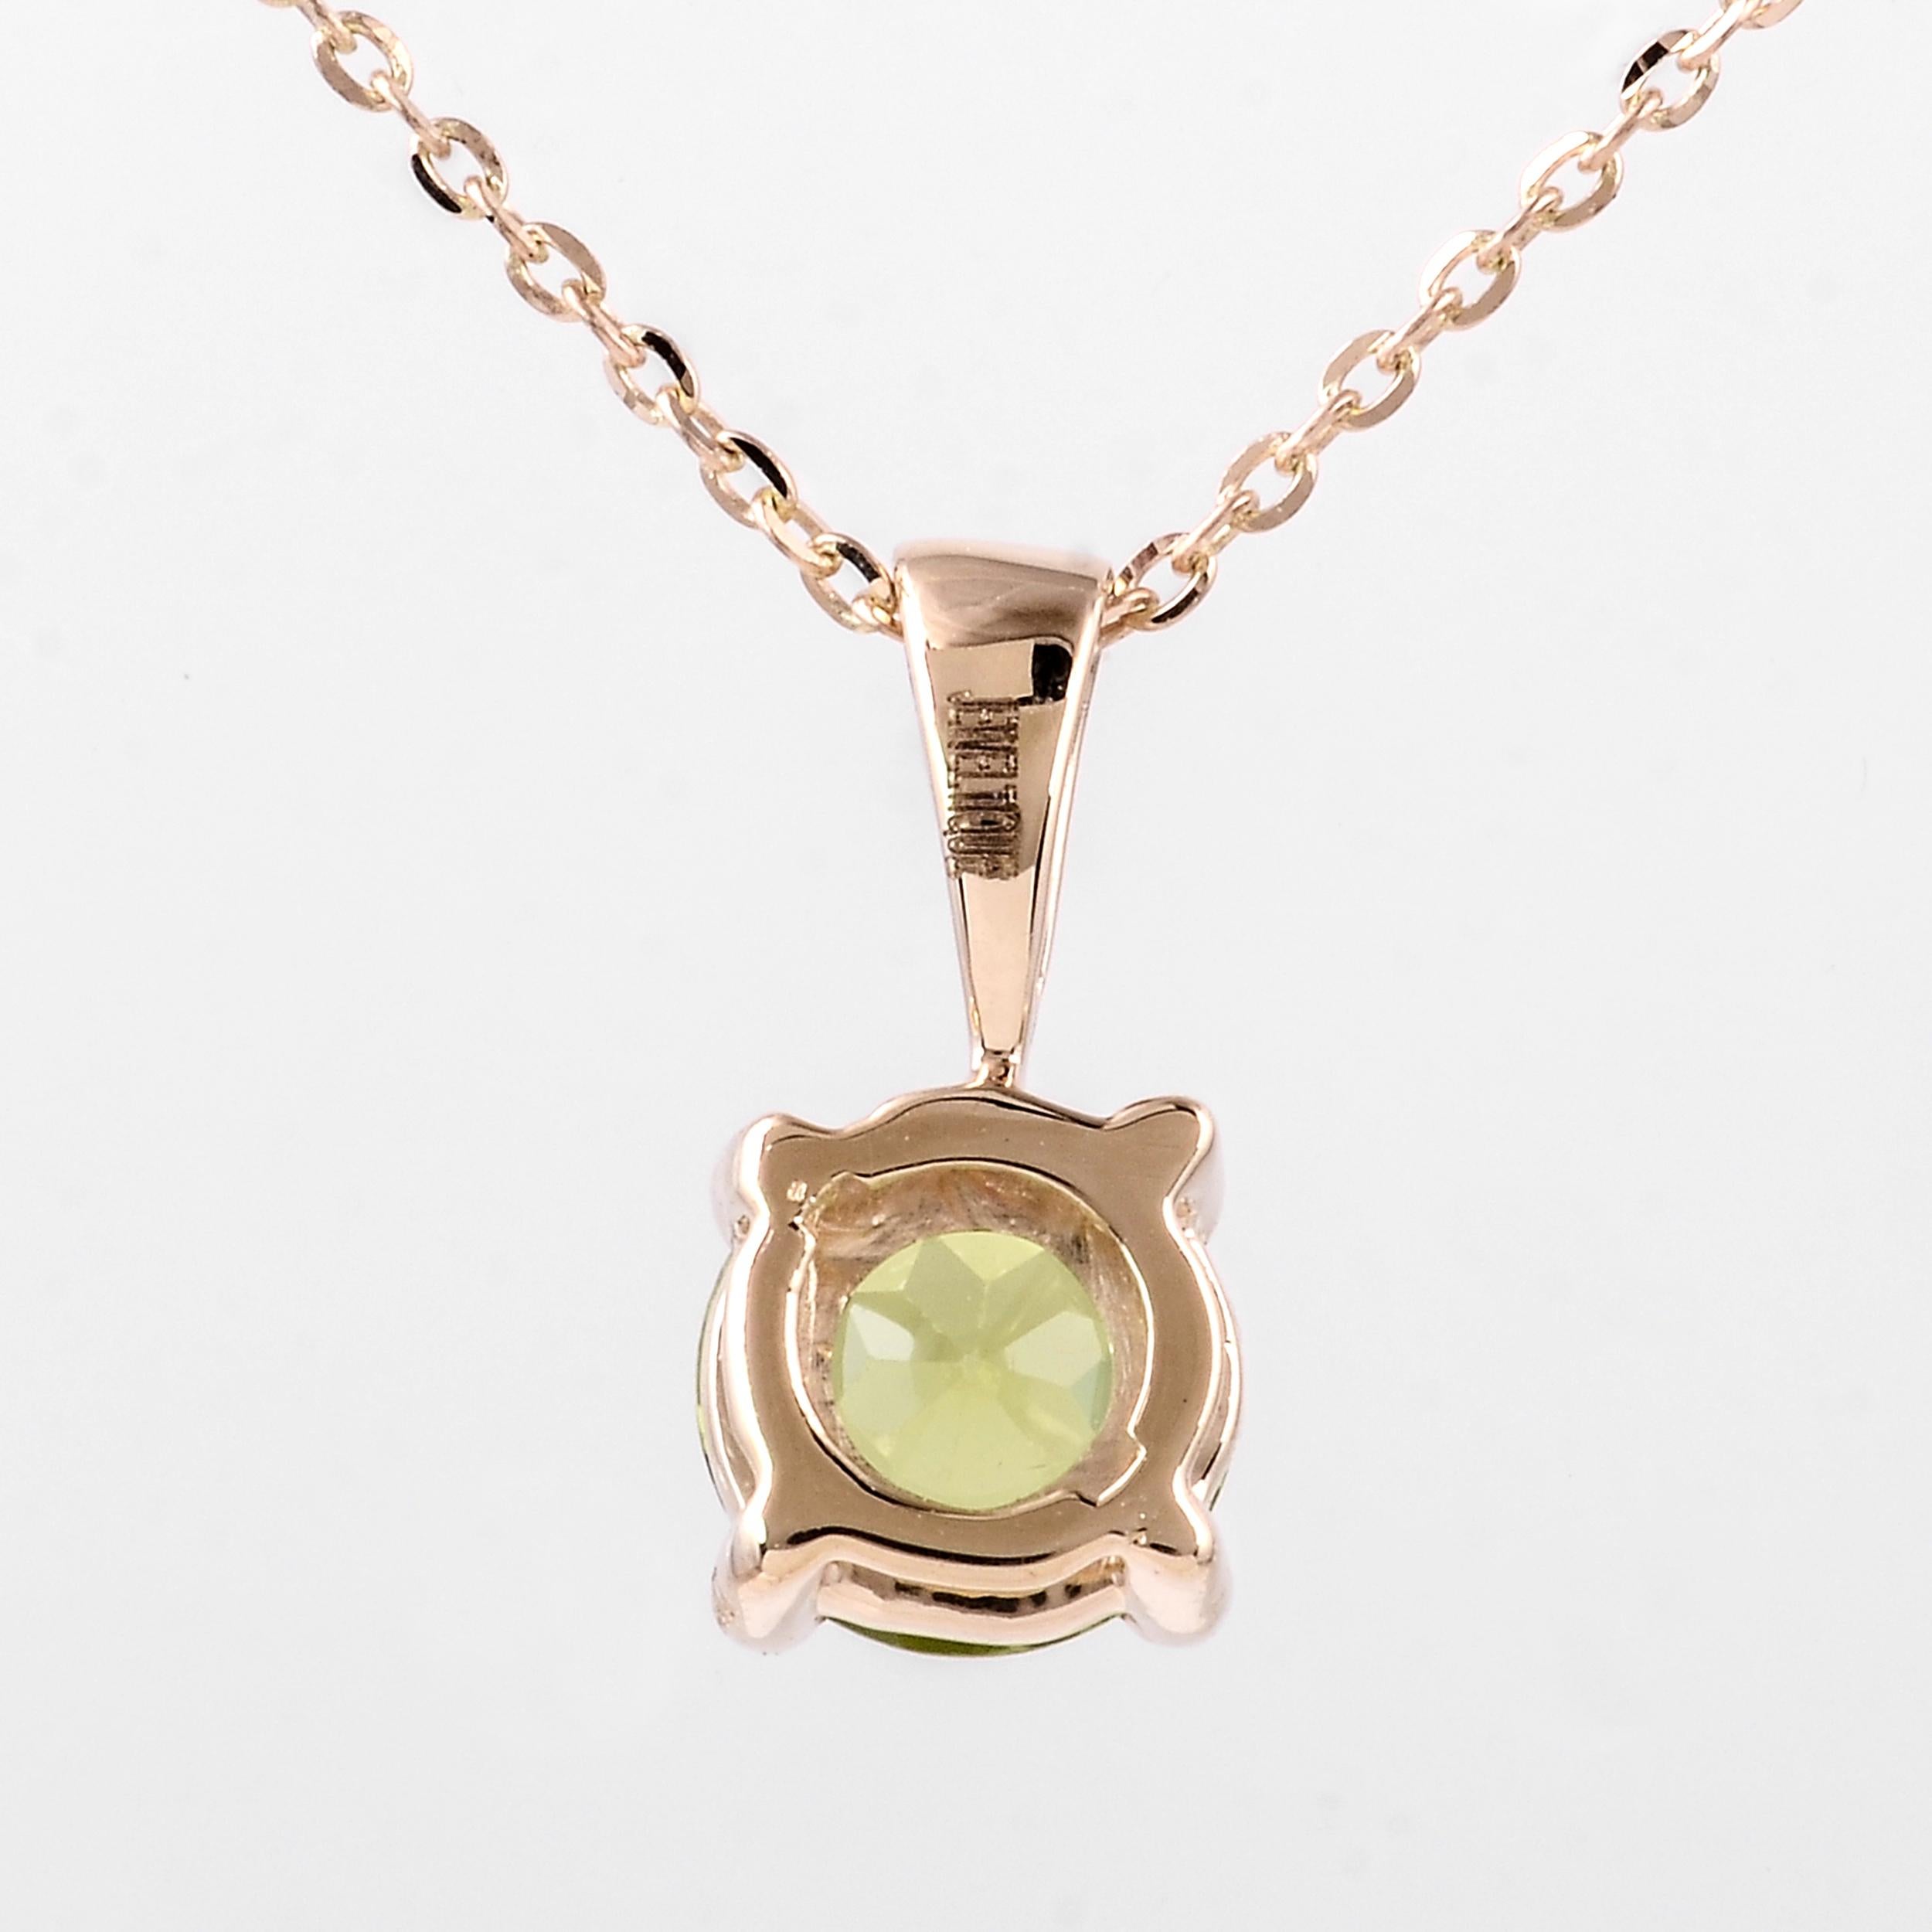 Luxury 14K Peridot Pendant Necklace - Exquisite Jewelry for Timeless Elegance In New Condition For Sale In Holtsville, NY